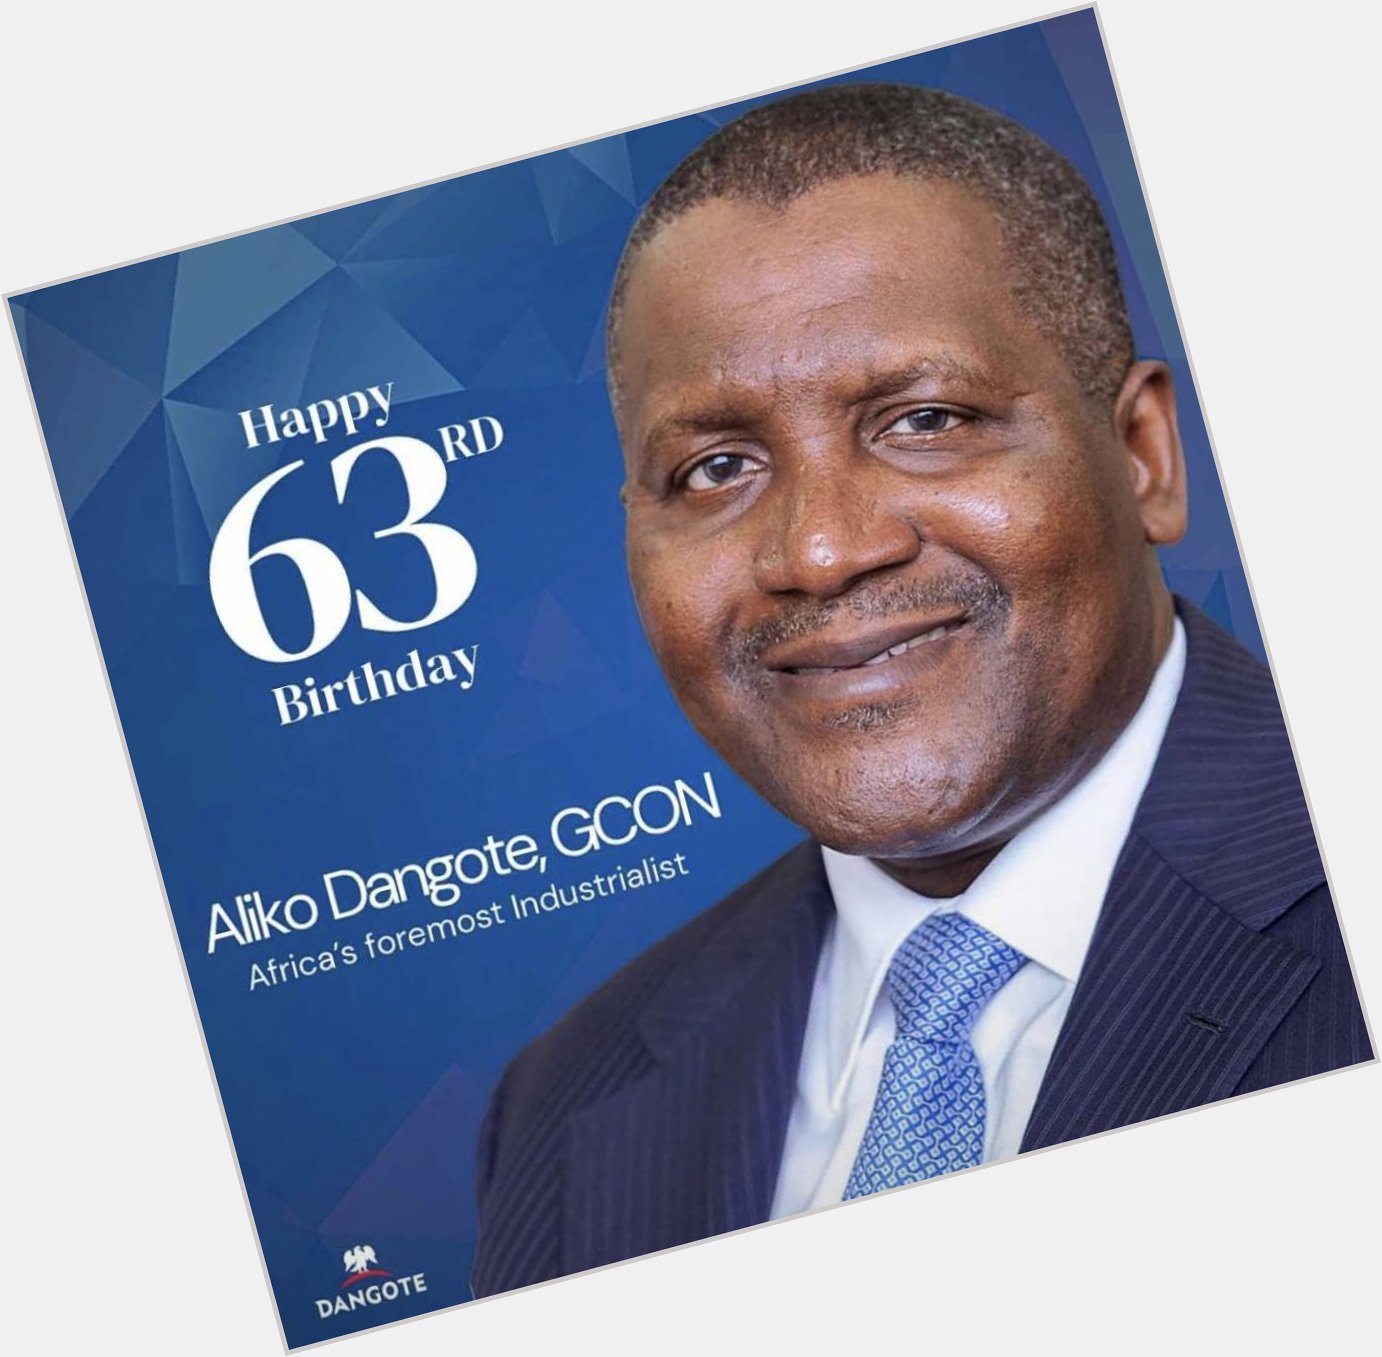 Happy birthday foremost industrialist Aliko Dangote. Your story is an inspiration to many. 